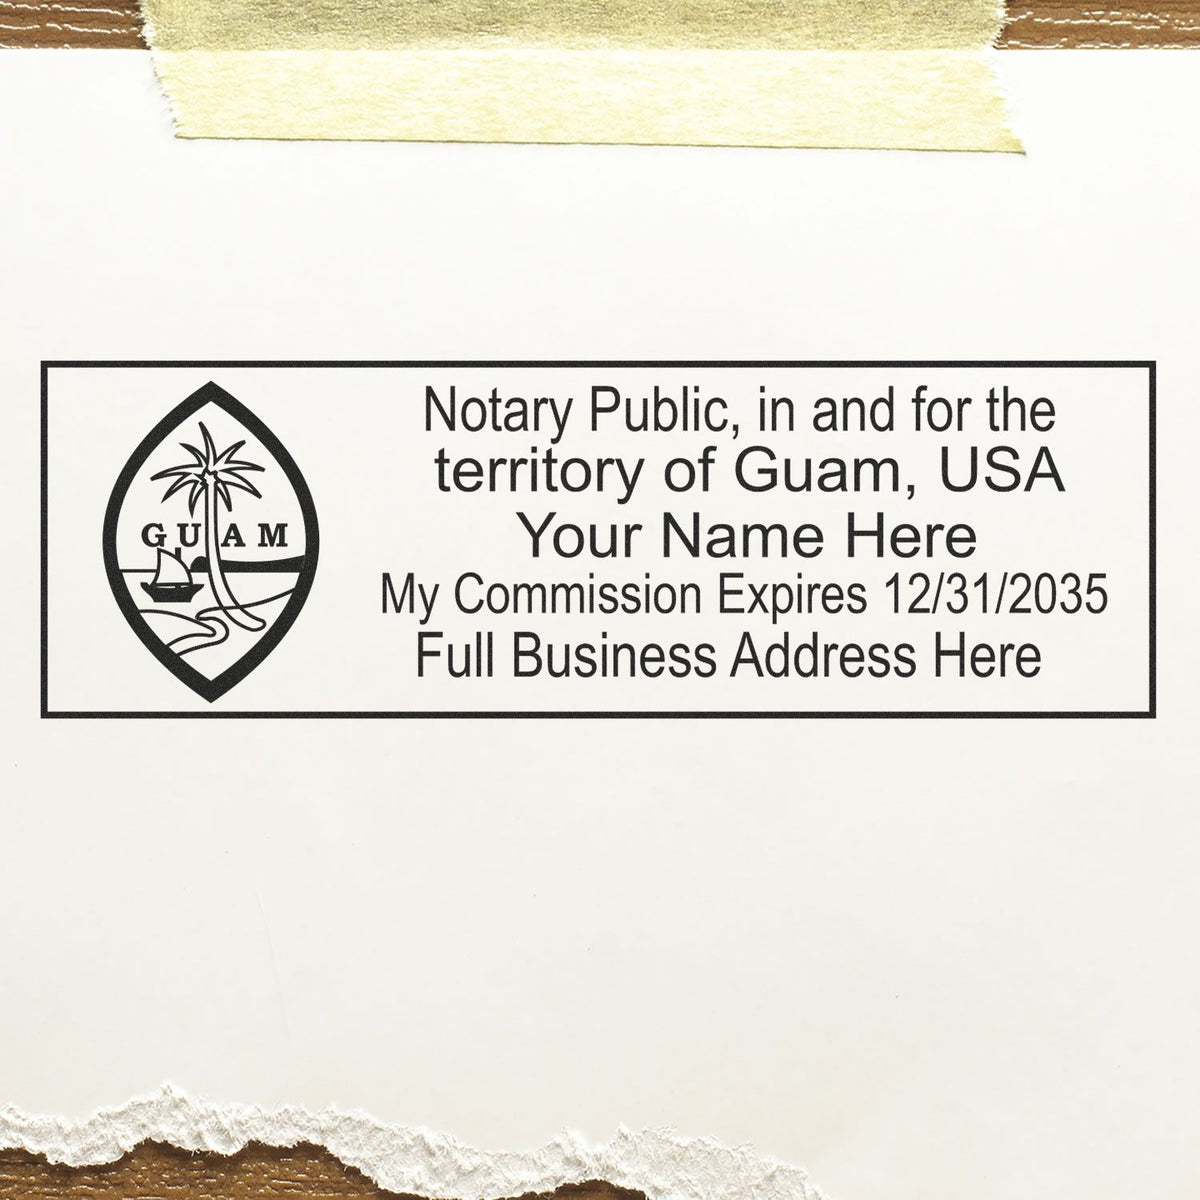 A lifestyle photo showing a stamped image of the Heavy-Duty Guam Rectangular Notary Stamp on a piece of paper